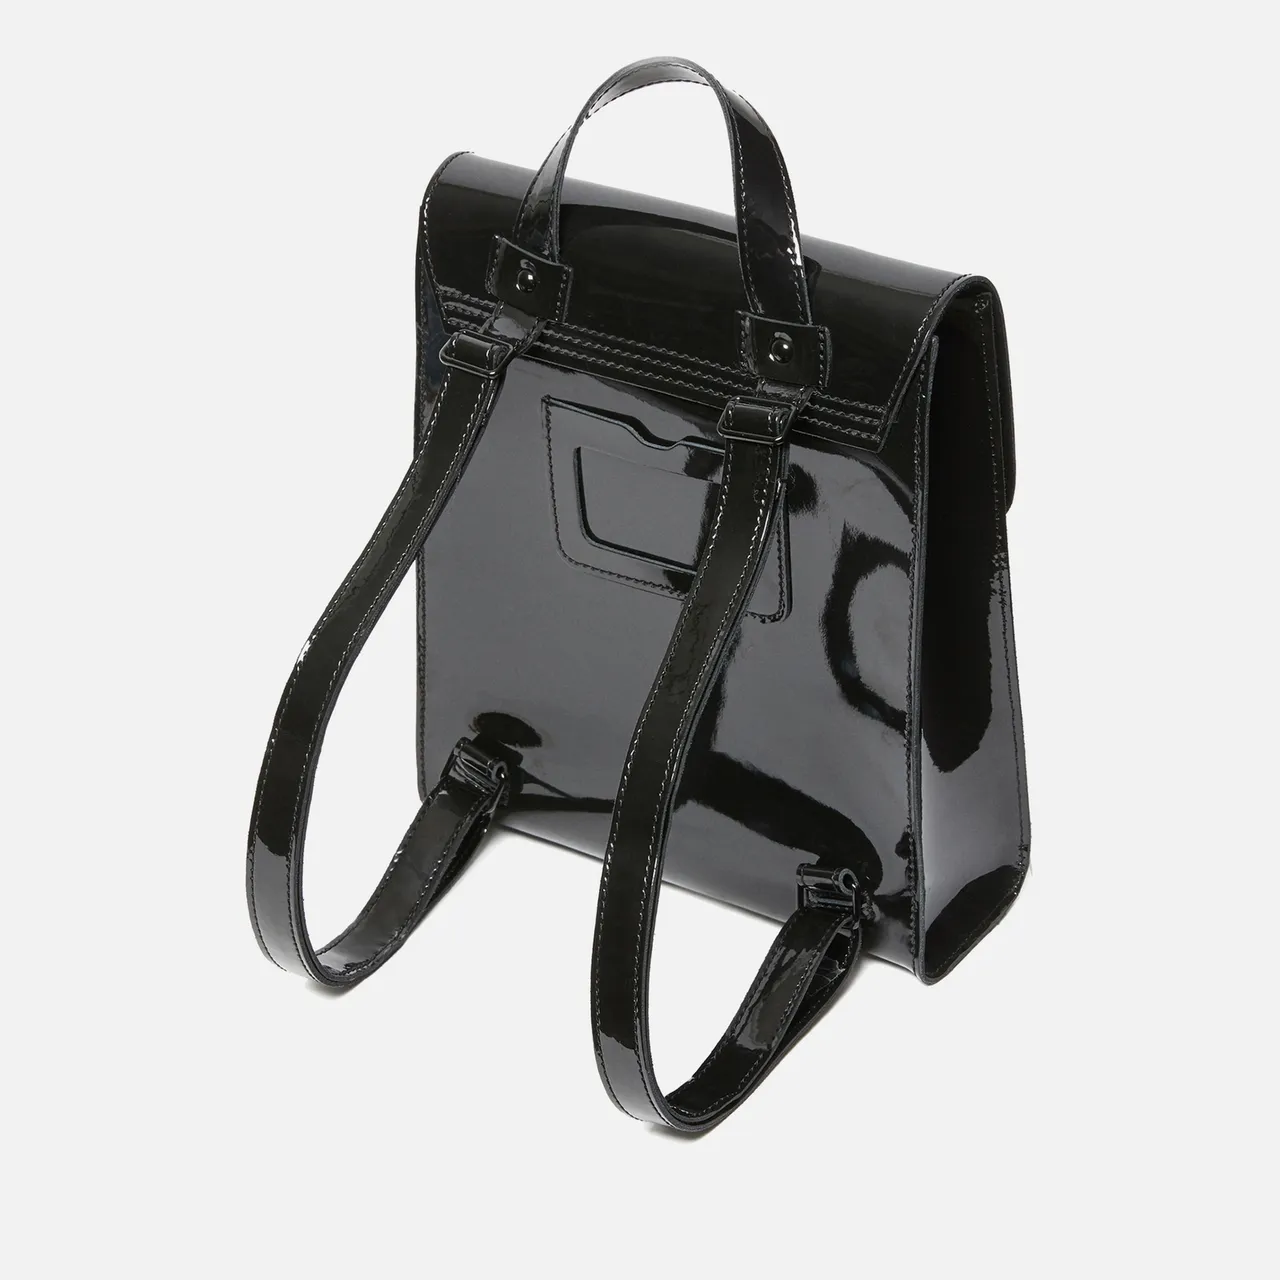 Dr. Martens Mini Patent Leather Backpack